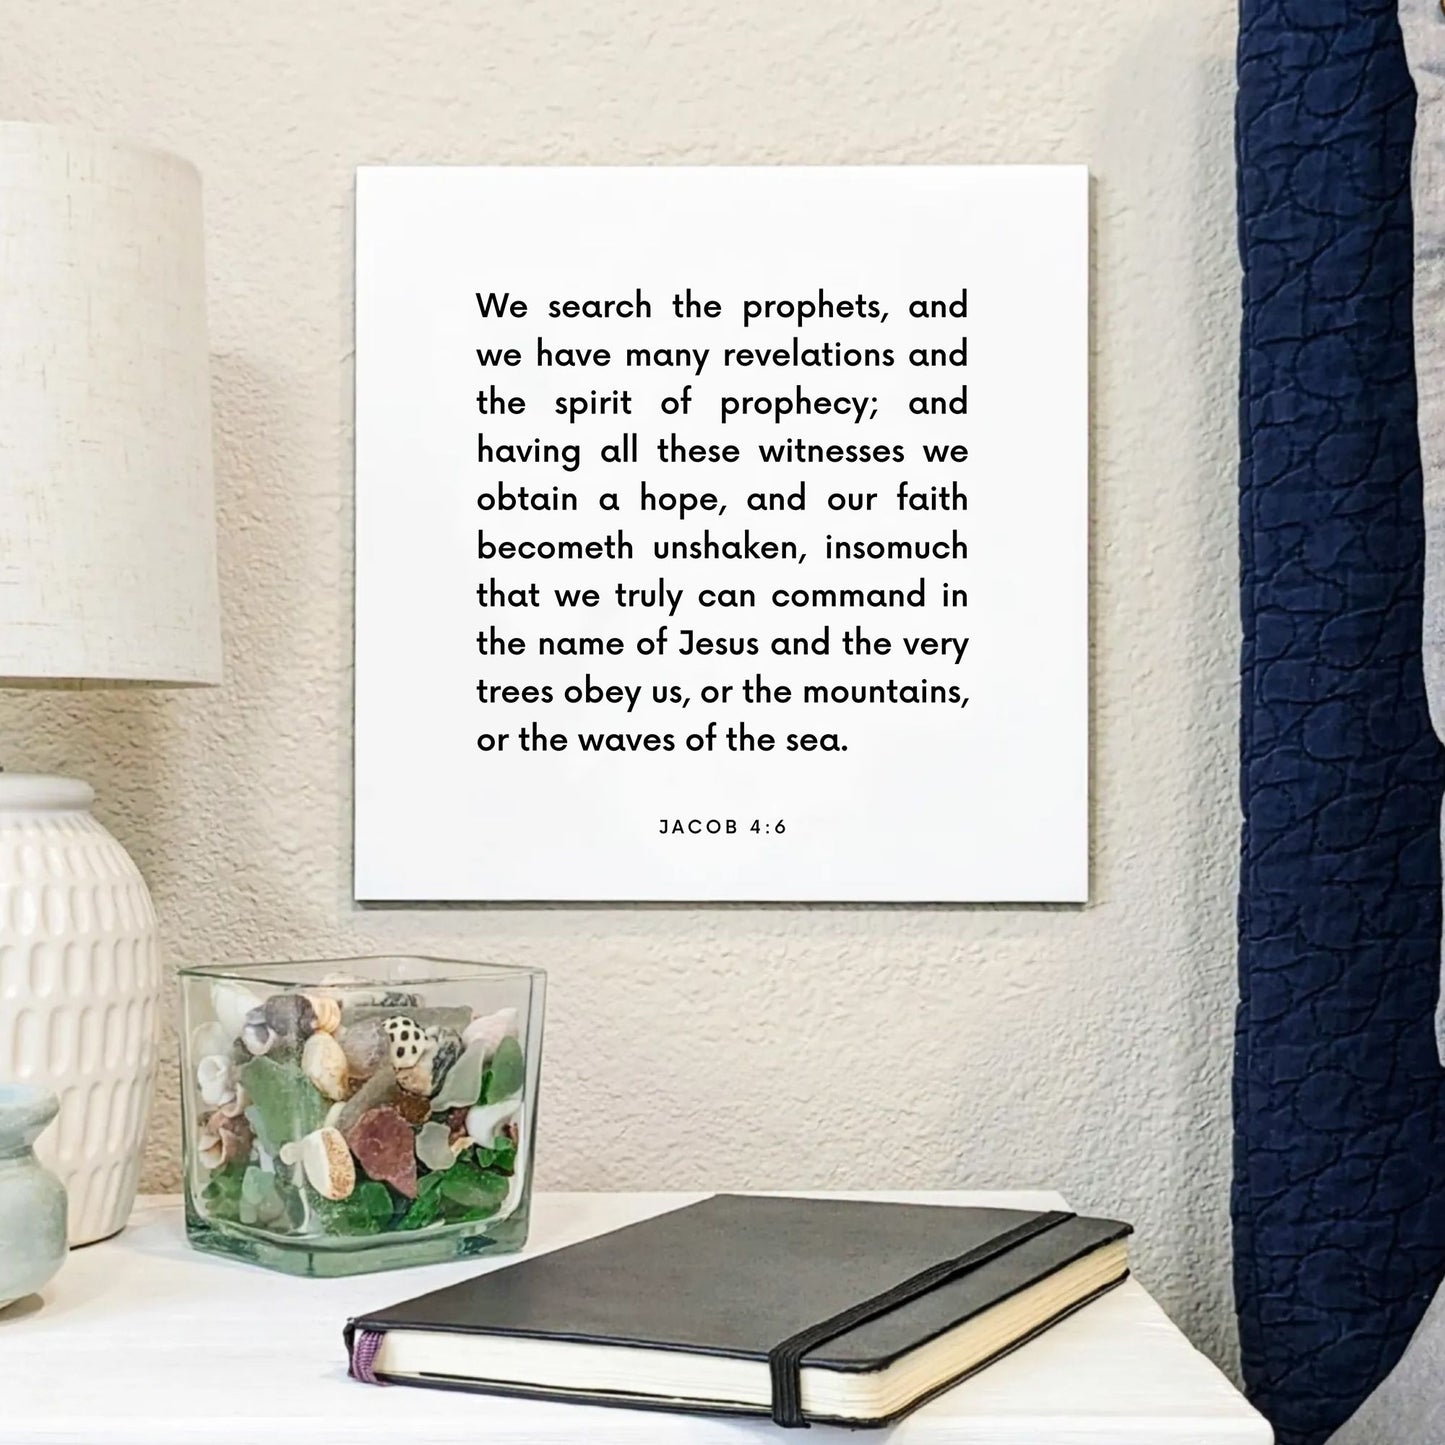 Bedside mouting of the scripture tile for Jacob 4:6 - "We search the prophets, and we have many revelations"